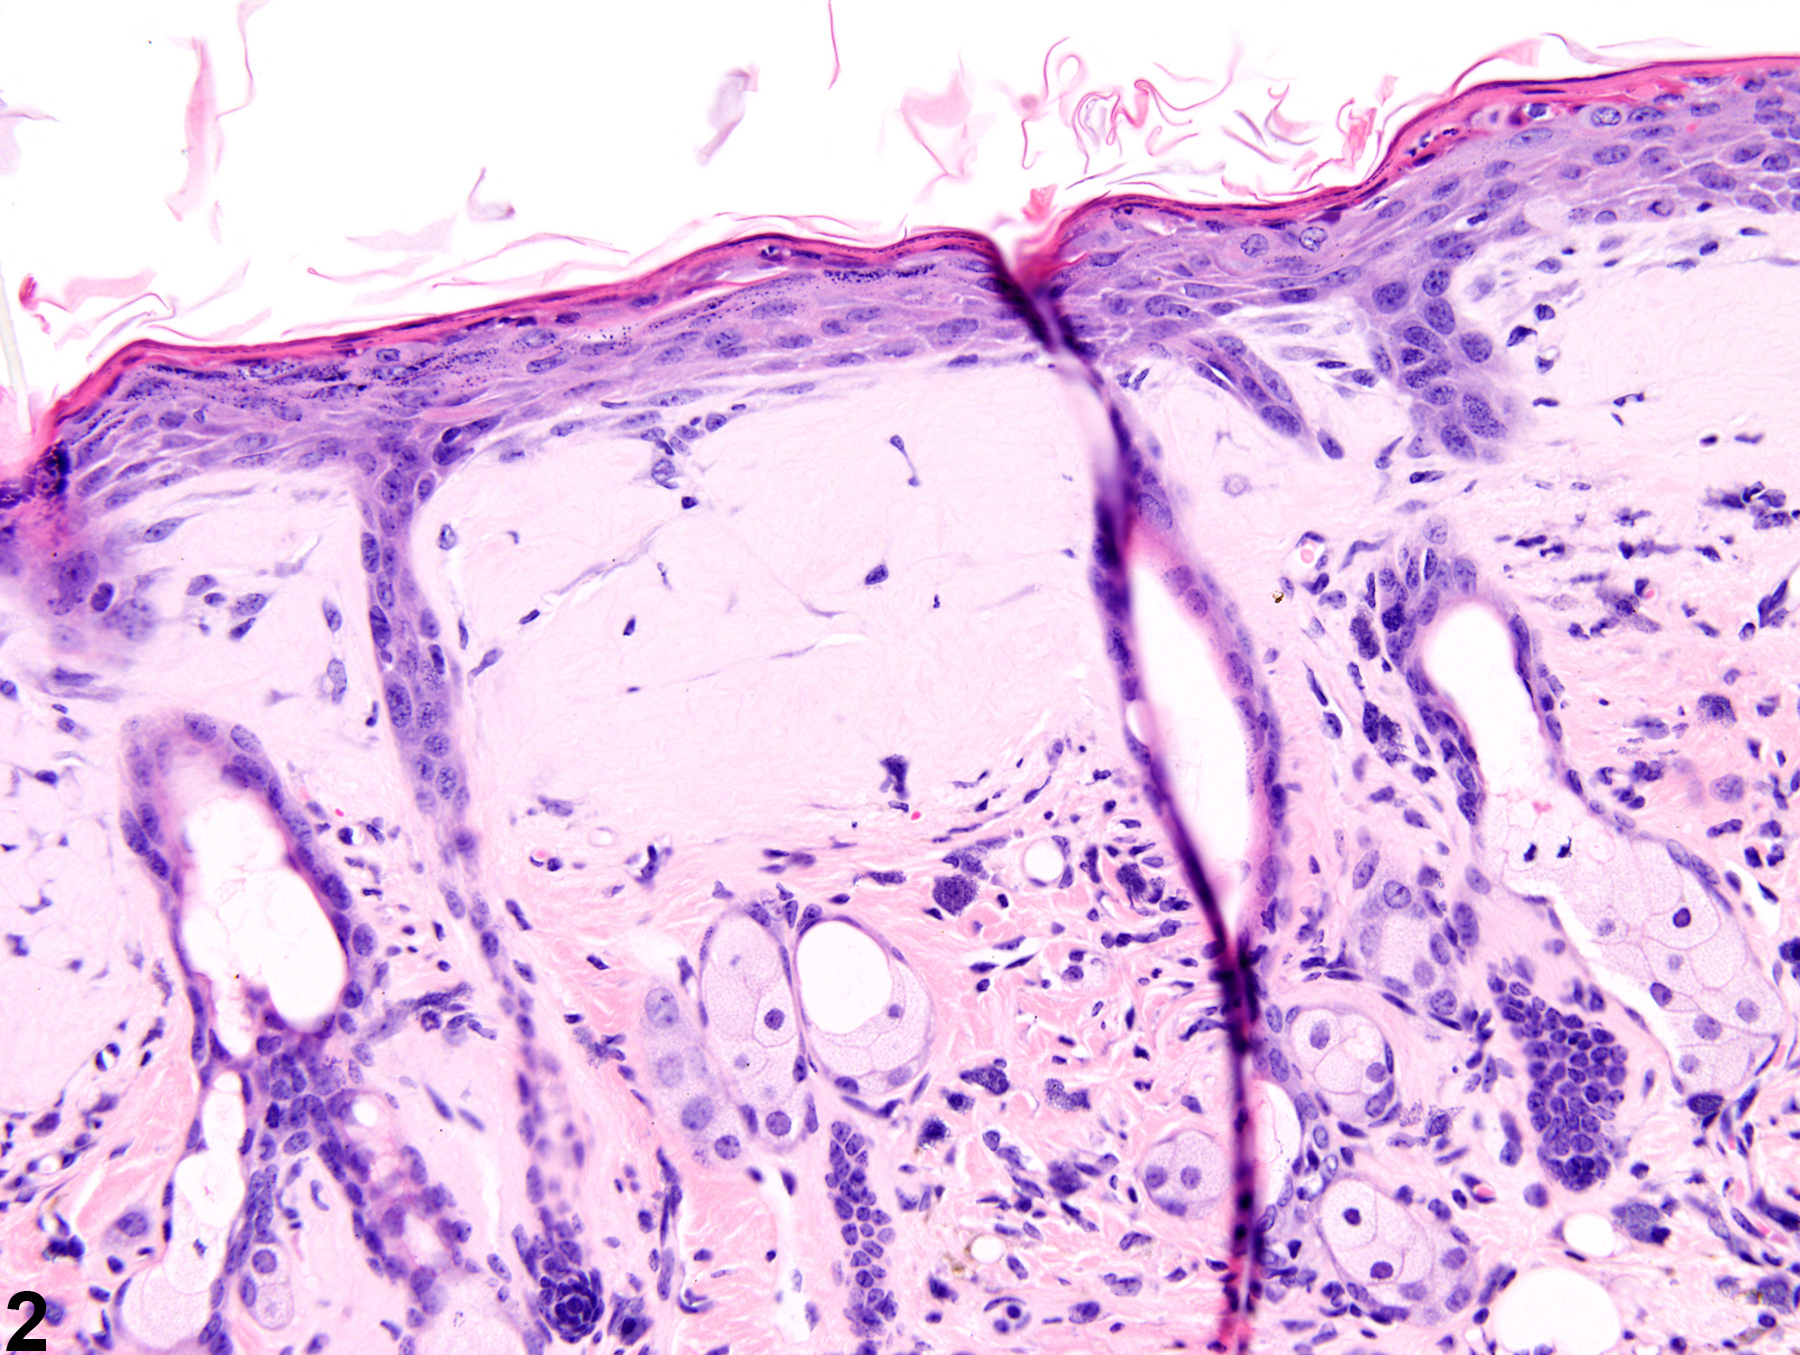 Image of amyloid in the skin from a female Swiss CD-1 mouse in a chronic study